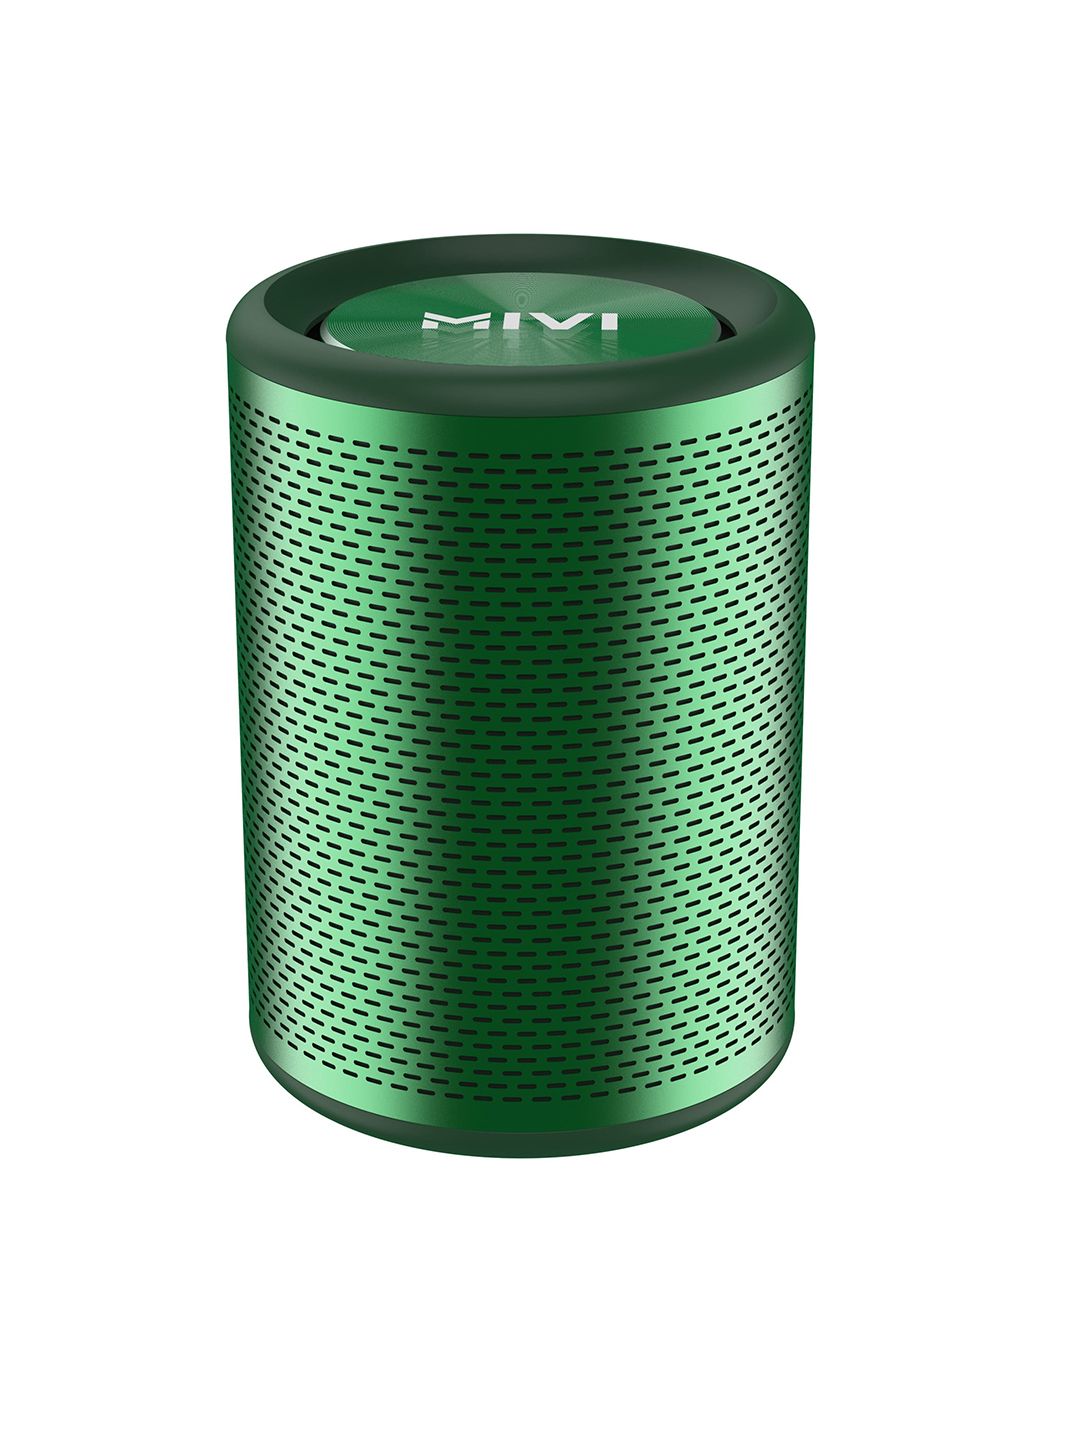 Mivi Octave 3 Wireless Bluetooth Speaker, 16W, (Green) Price in India